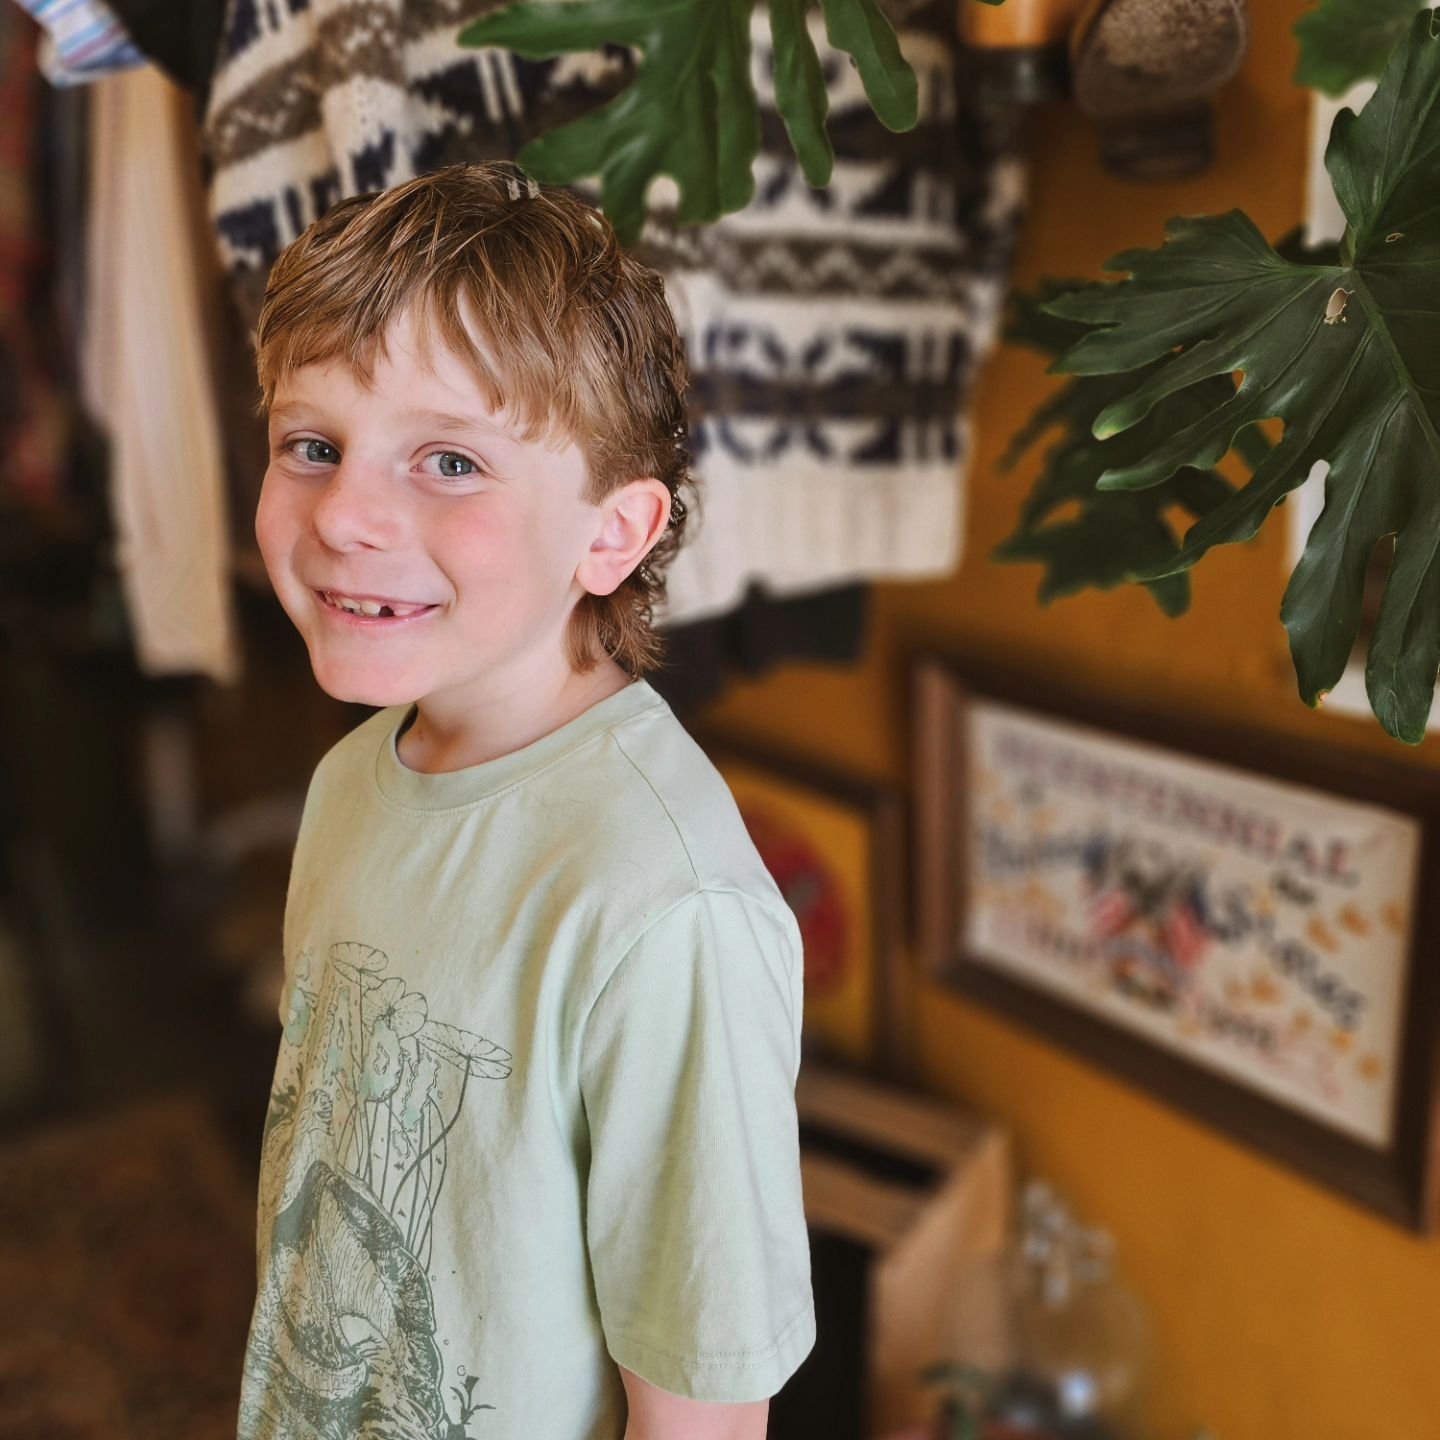 We love when parents give kids creative control of their hair. After all, it's just hair🤘 This kiddo came in with long, curly, blonde locks &amp; left with a subtle hockey mullet. His stoke was HIGH. SUMMER is creepin' up, let's get you summer ready